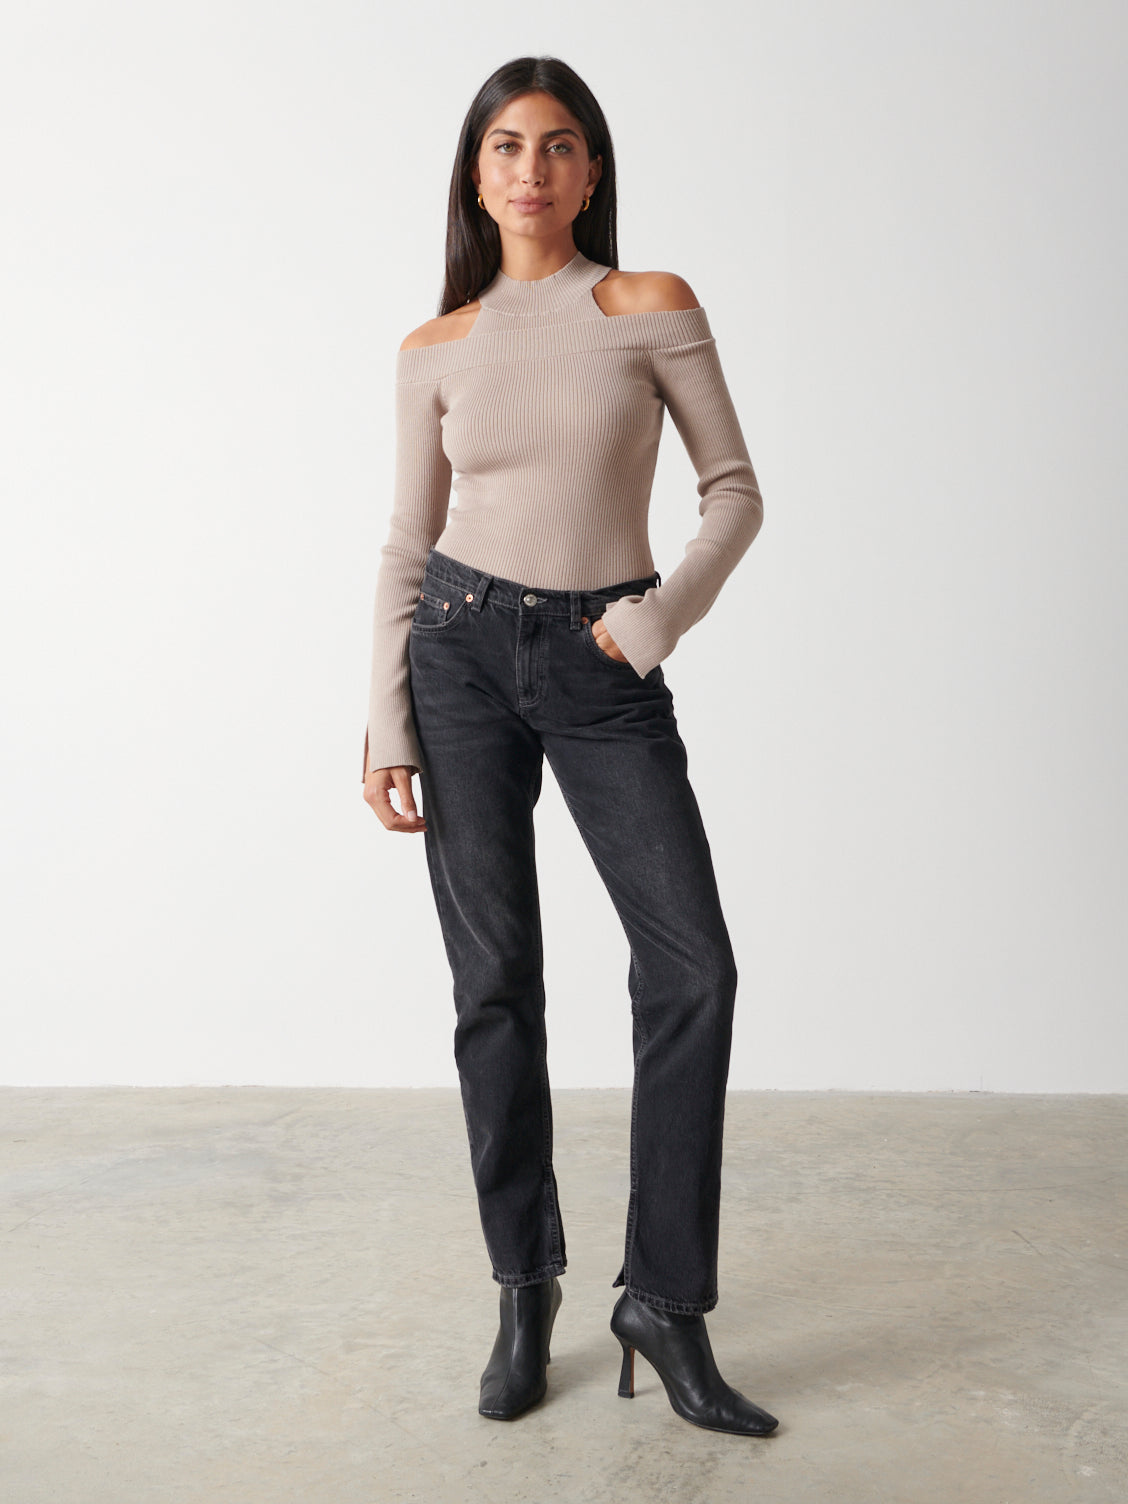 Kennedy Cut Out Knit Top - Taupe